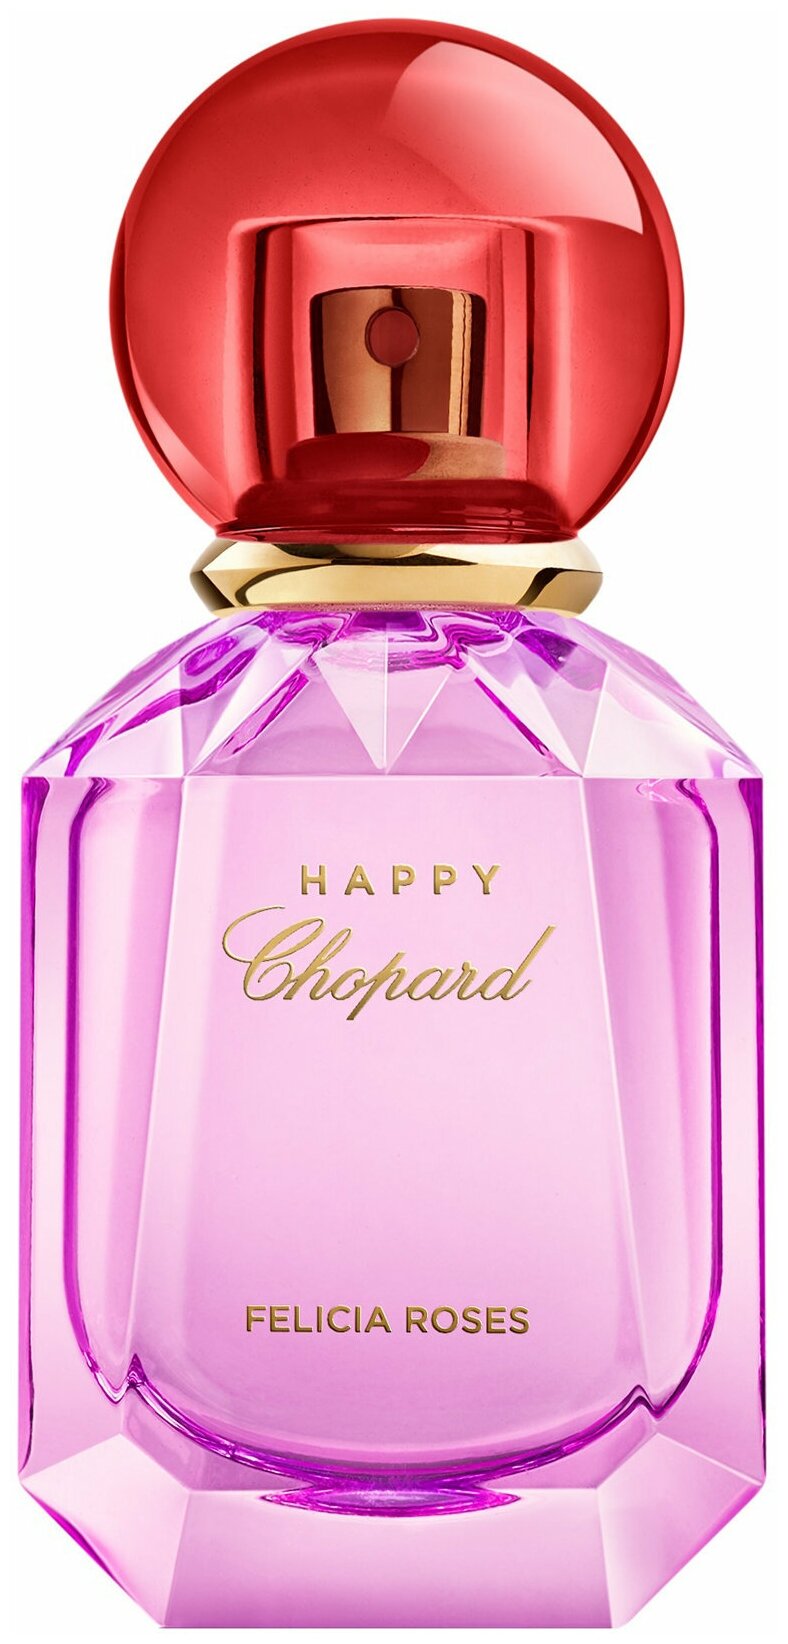 Chopard парфюмерная вода Happy Felicia Roses, 40 мл